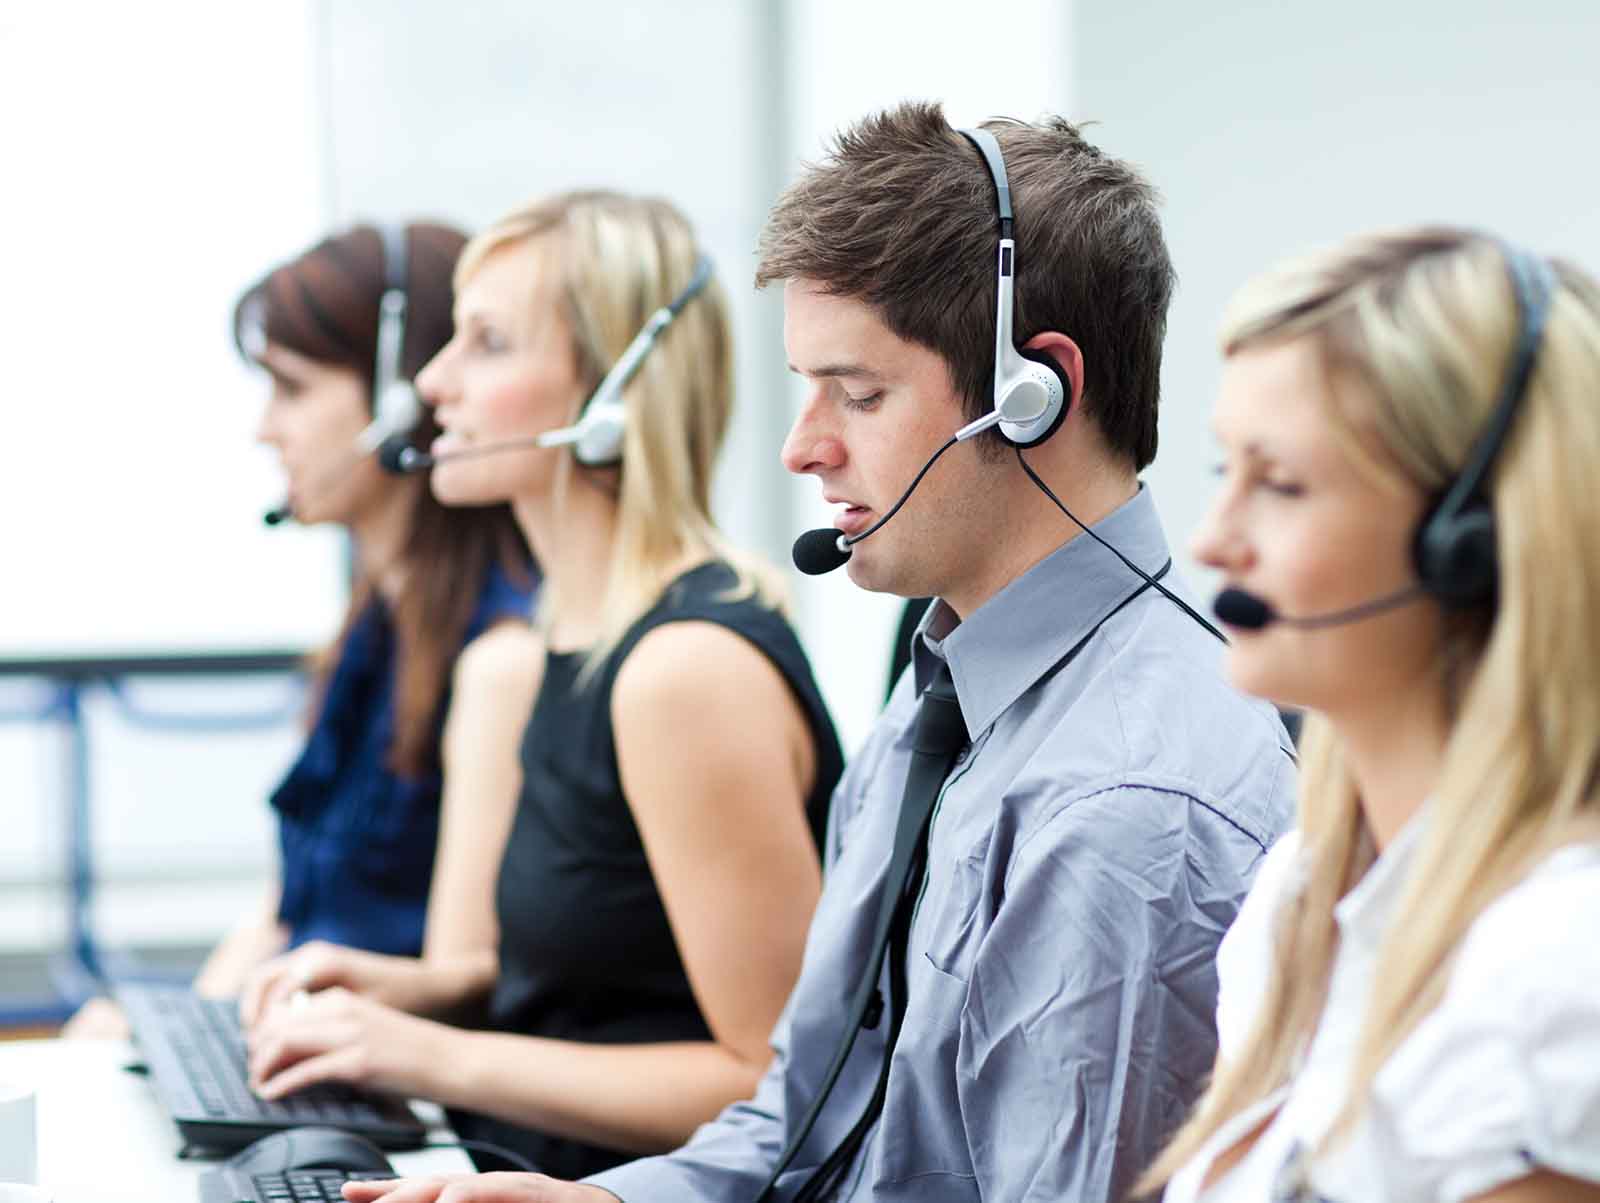 Image portraying call center workers associated with DataField Technology Services, emphasizing Talent Acquisition & Staffing Services to maintain relevance with the page's context.